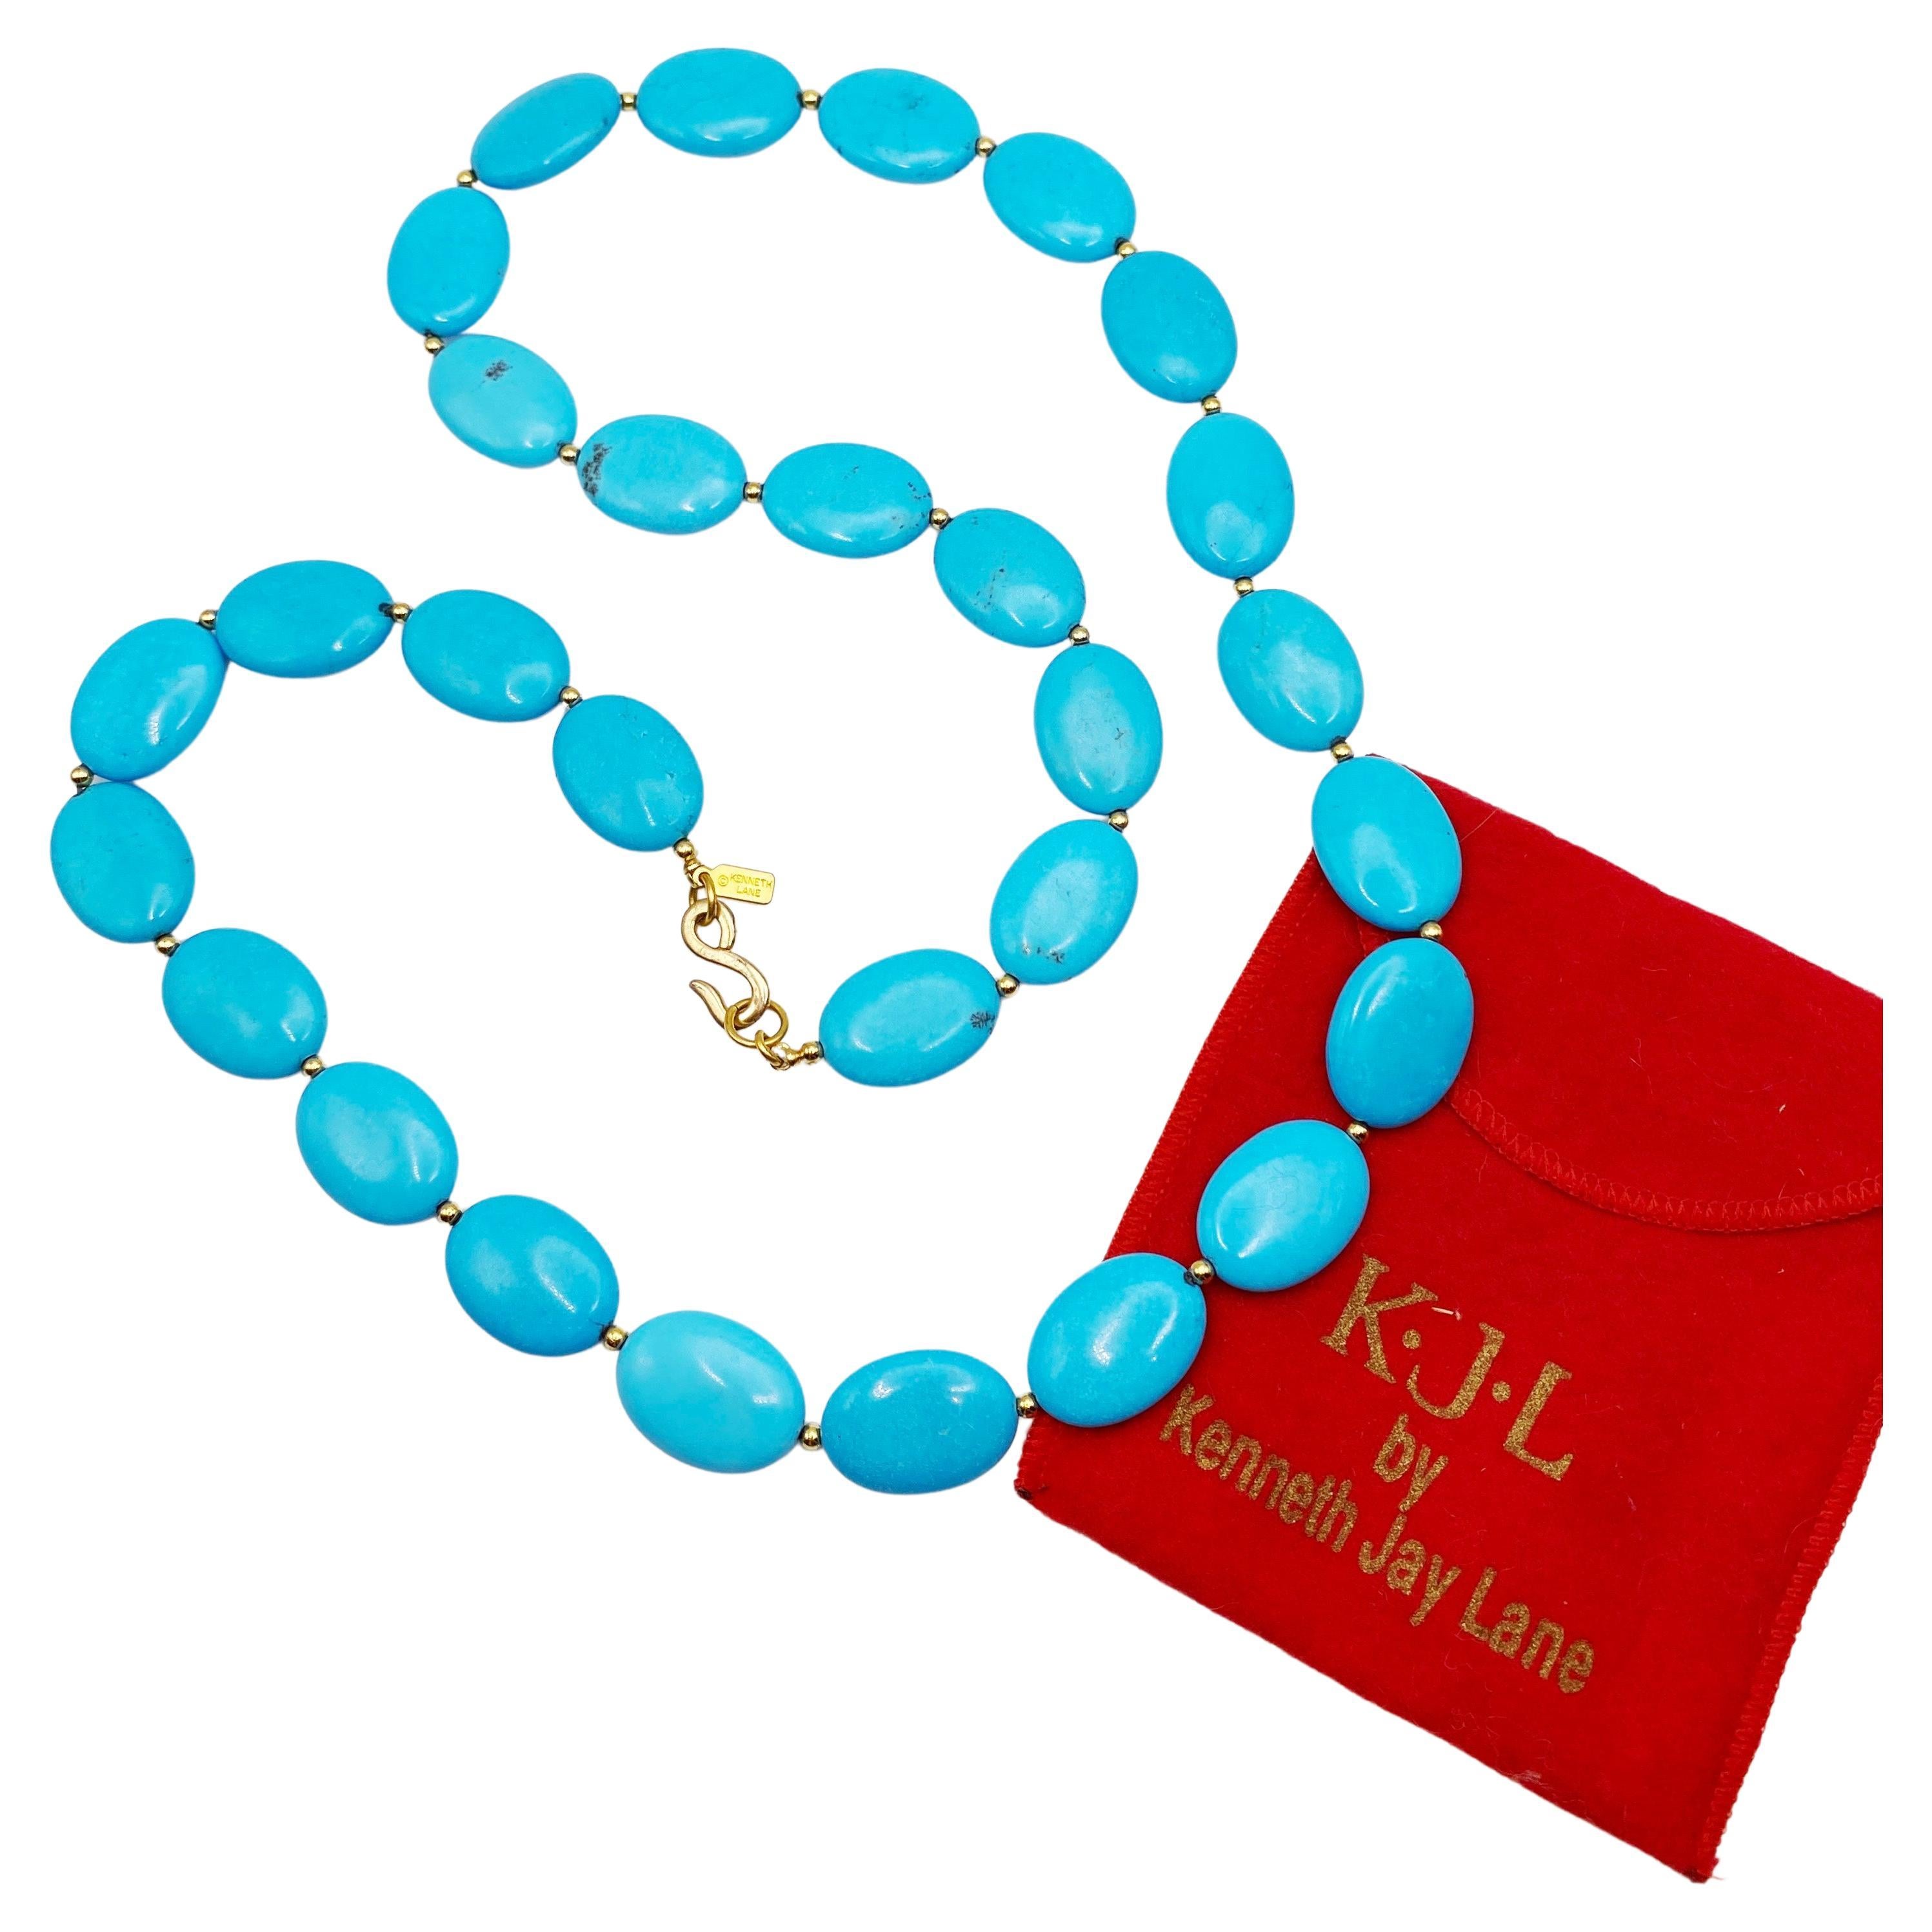 Kenneth Jay Lane Faux Turquoise Bead Necklace